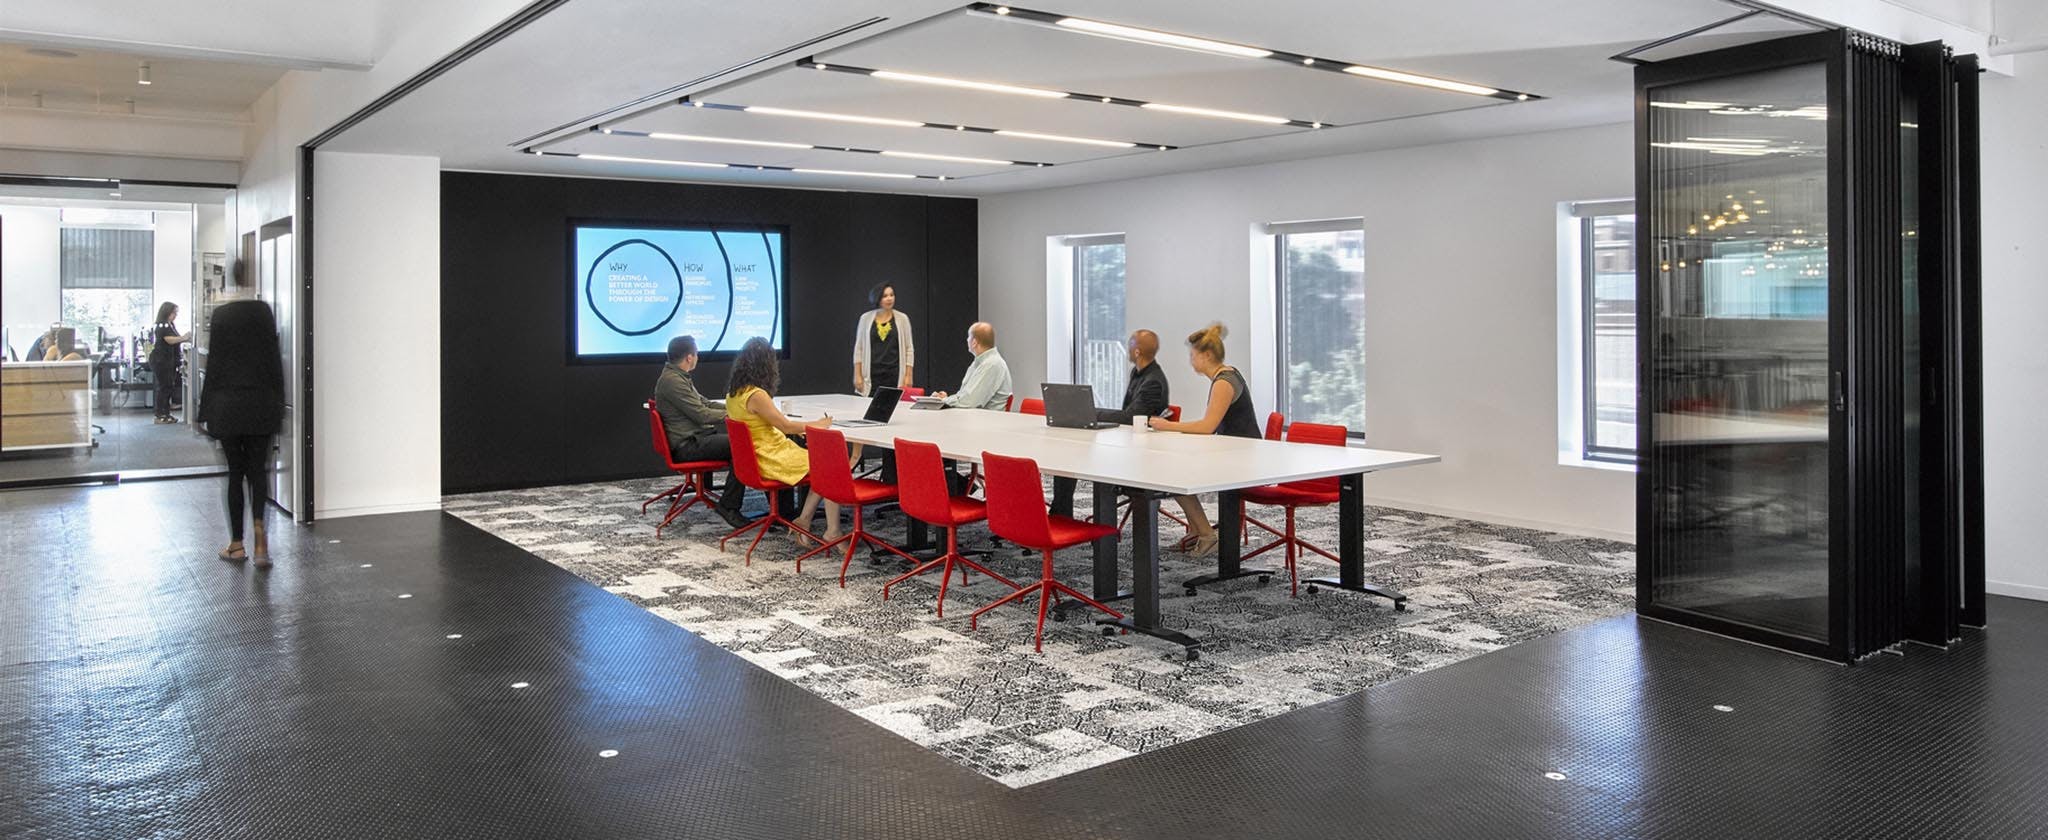 flexible conference room for office interiors with sliding interior glass wall